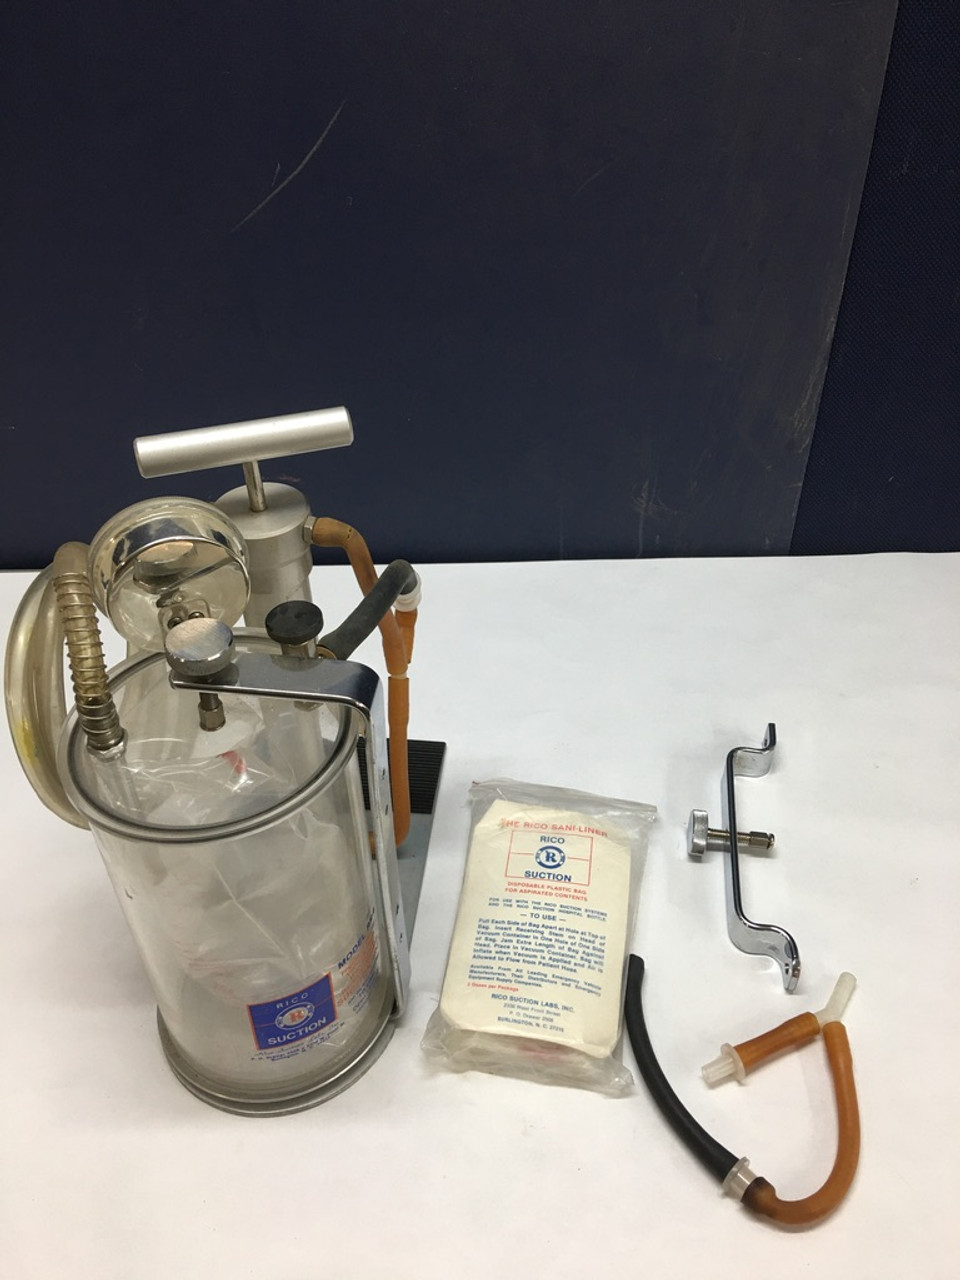 Rico Suction Labs Model RS-6 Ambulance Portable Aspirator Suction Device